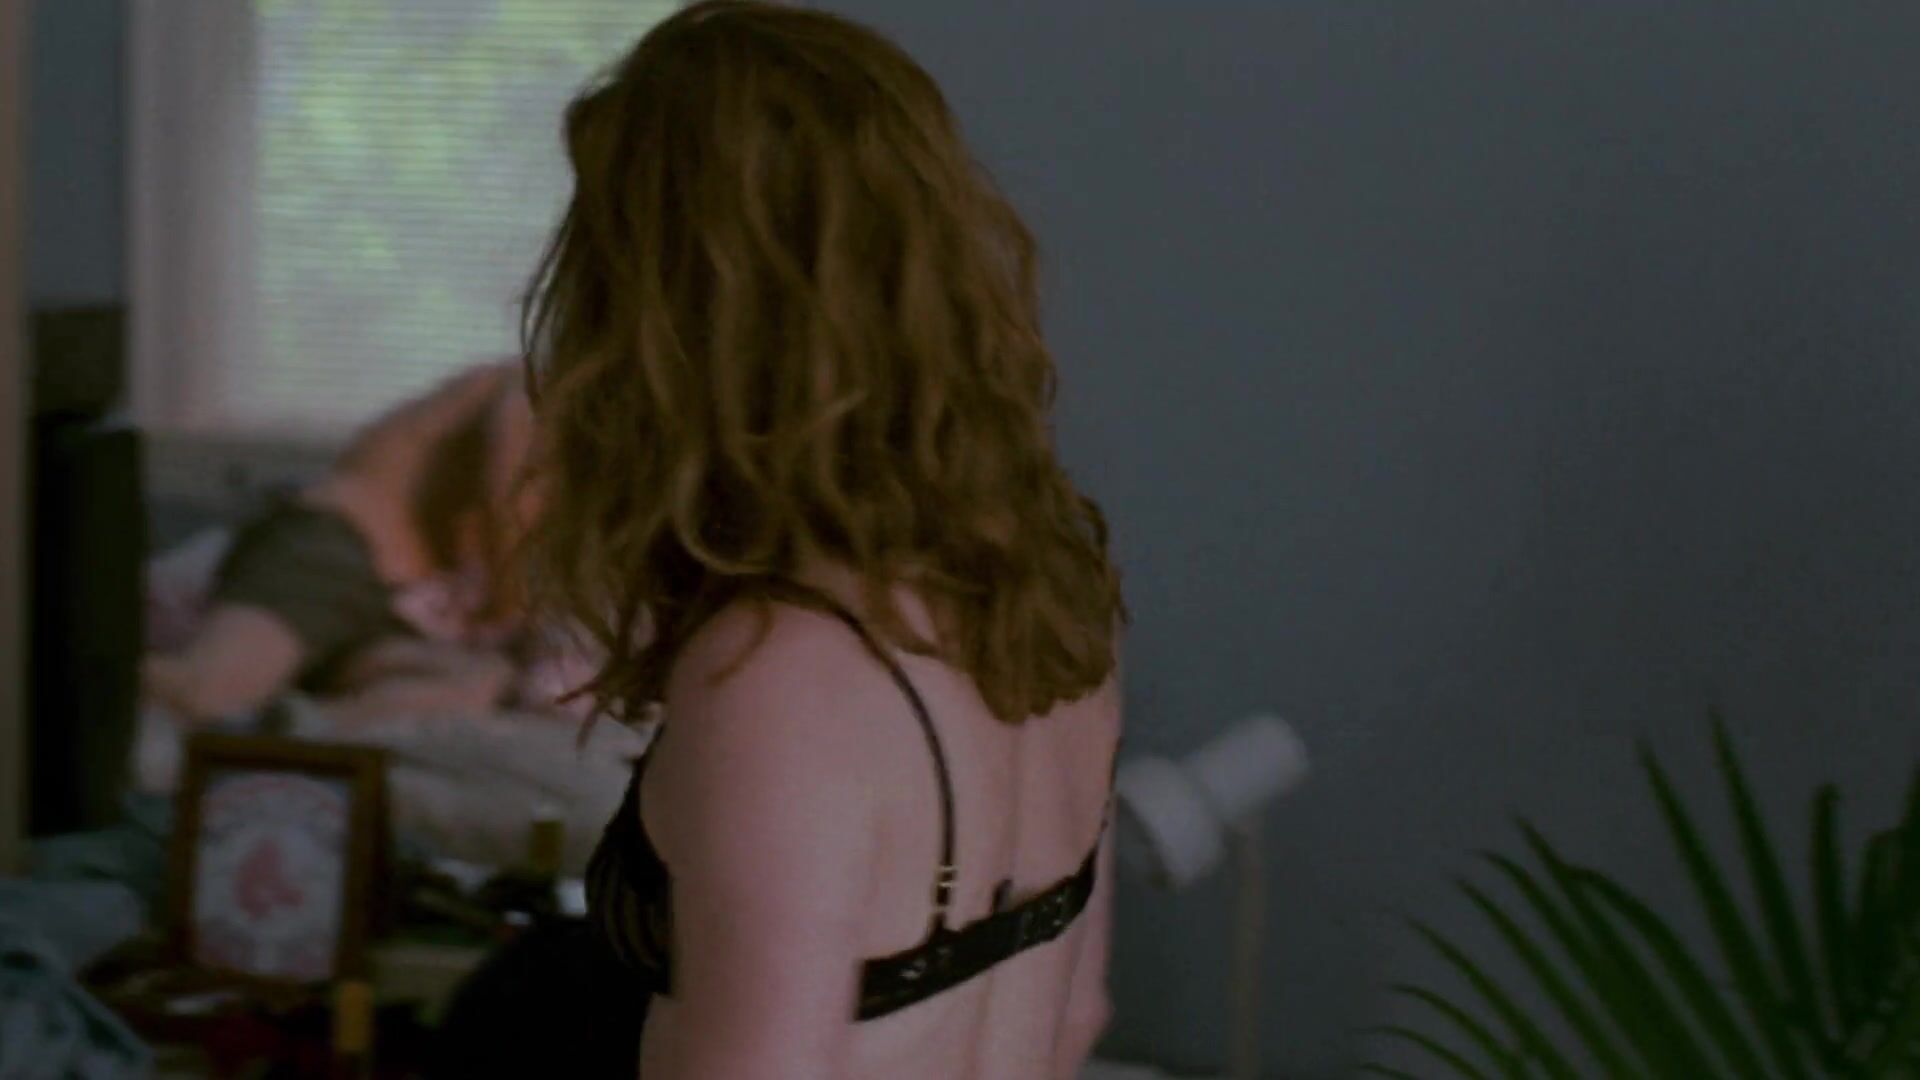 ClipHunter Man takes Amy Adams to bed but fails to bonk her in nude scene from The Fighter (2010) Naked